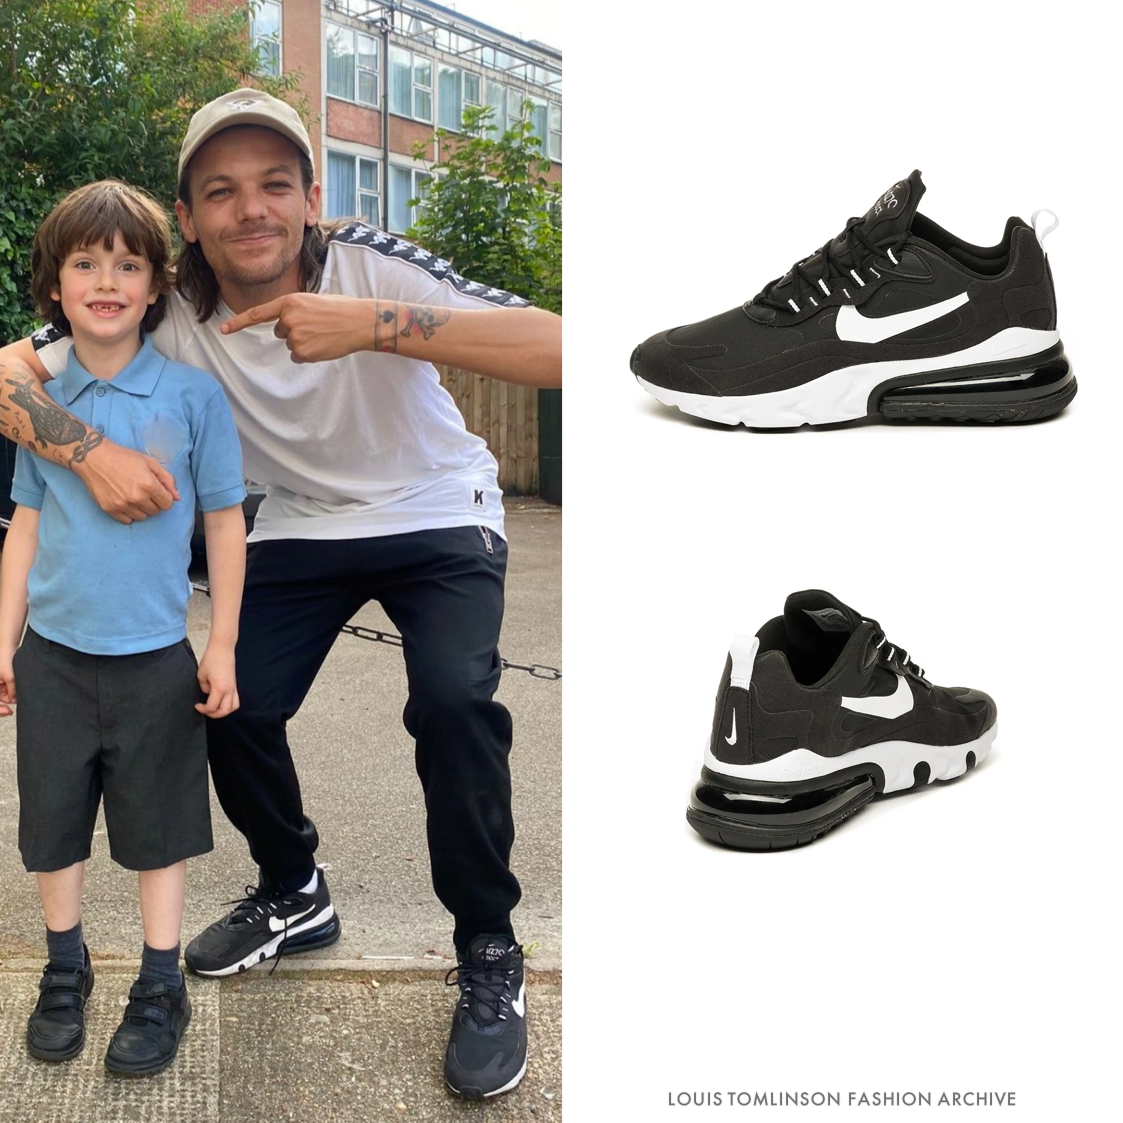 Louis Tomlinson Fashion on X: Louis is wearing a customised